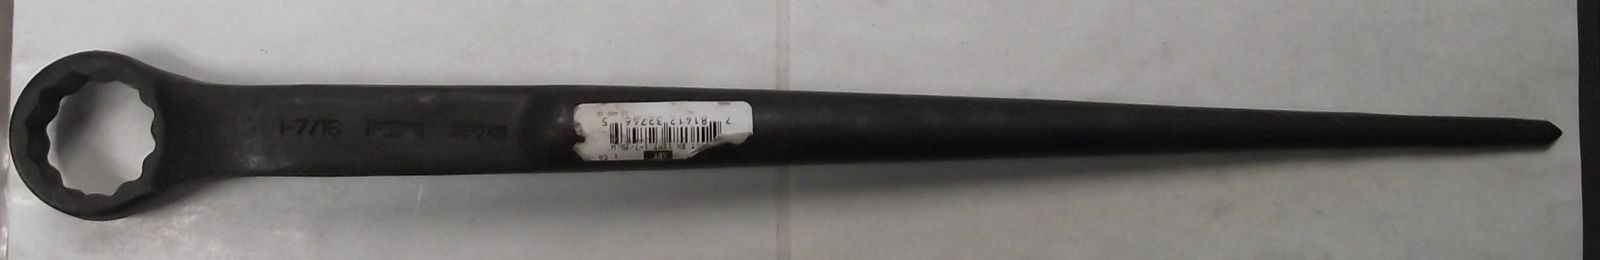 Armstrong 32-746 1-7/16" Black Oxide 12 Point Box End Black Oxide Structural Wrench USA